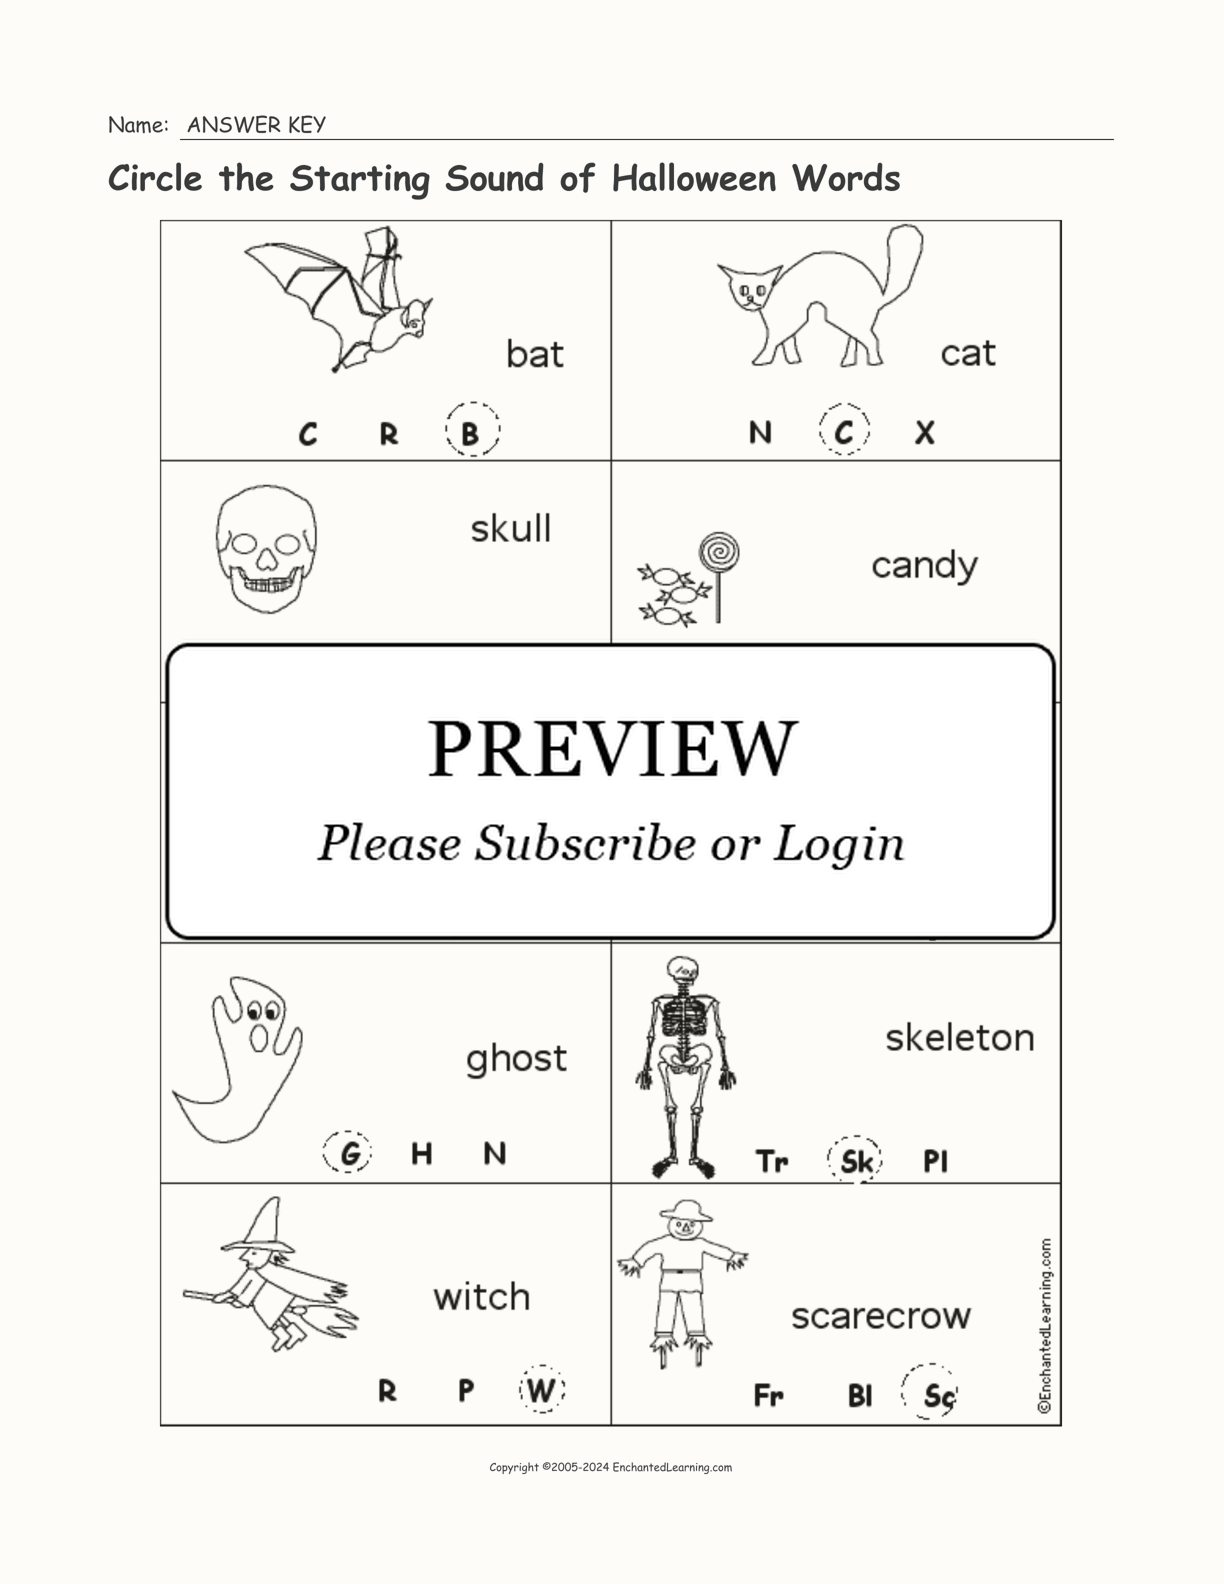 Circle the Starting Sound of Halloween Words interactive worksheet page 2